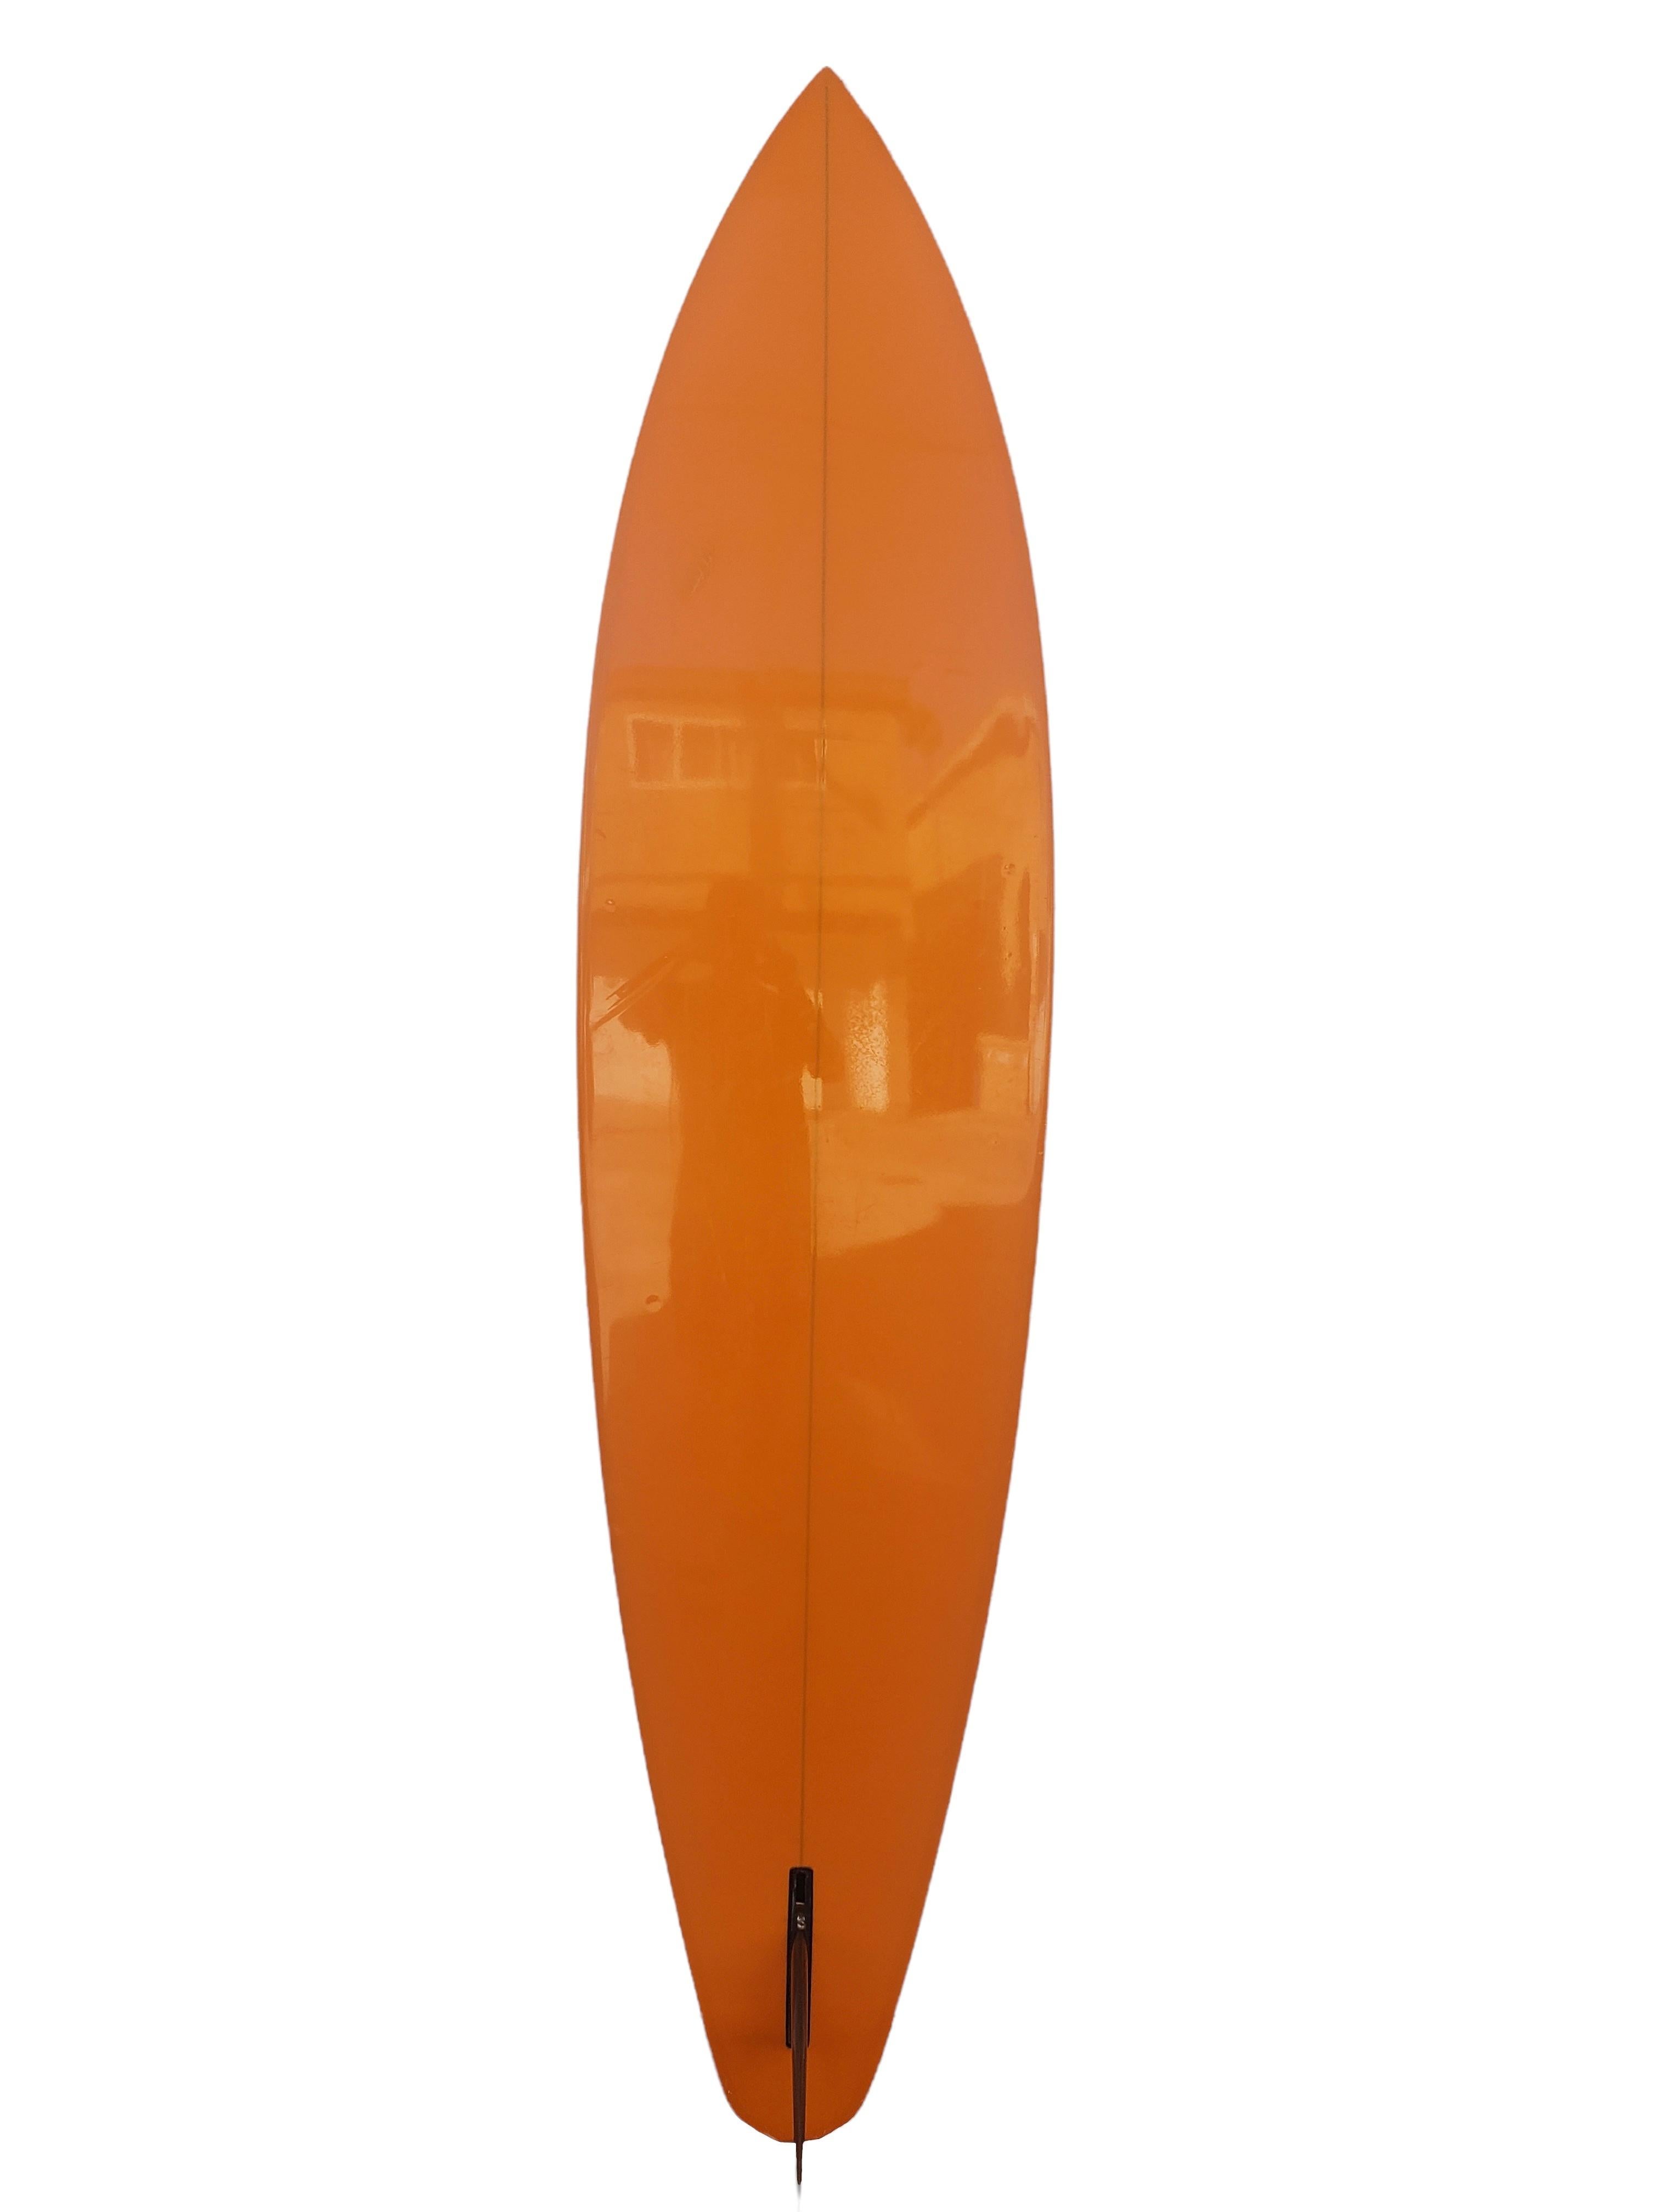 Early-mid 1970s Vintage Gerry Lopez model Lightning surfboard. Features a unique diamond tail shape design with gorgeous orange tint, black lightning bolt with matching pinstriping. A magnificent well preserved Gerry Lopez surfboard made under the